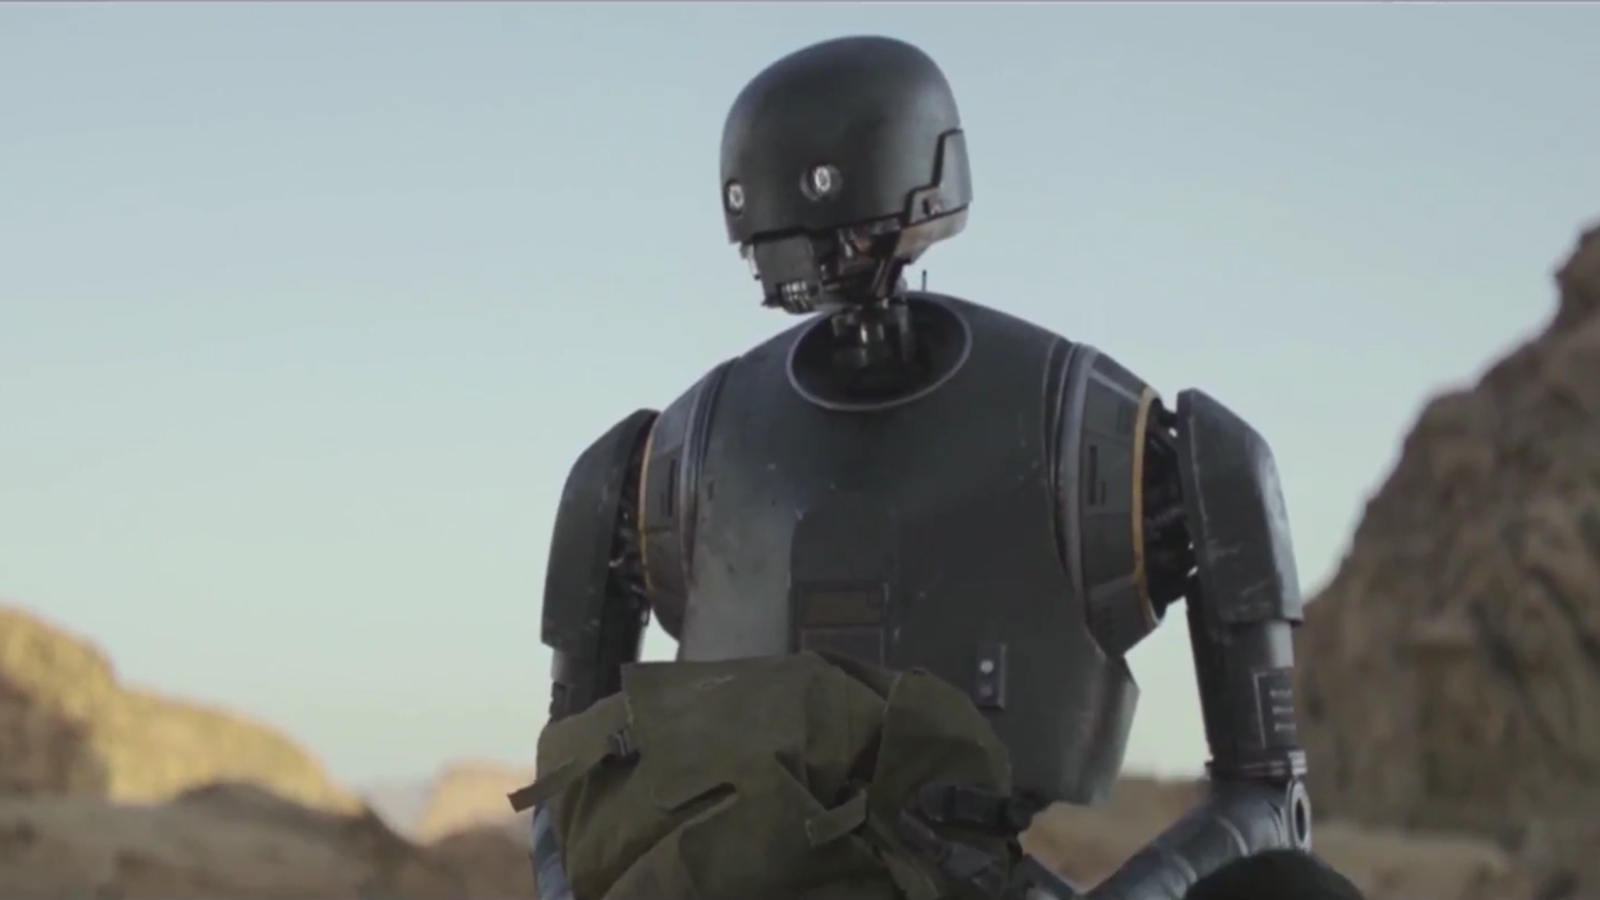 rogue-one-k-2so_1276_0_0.png